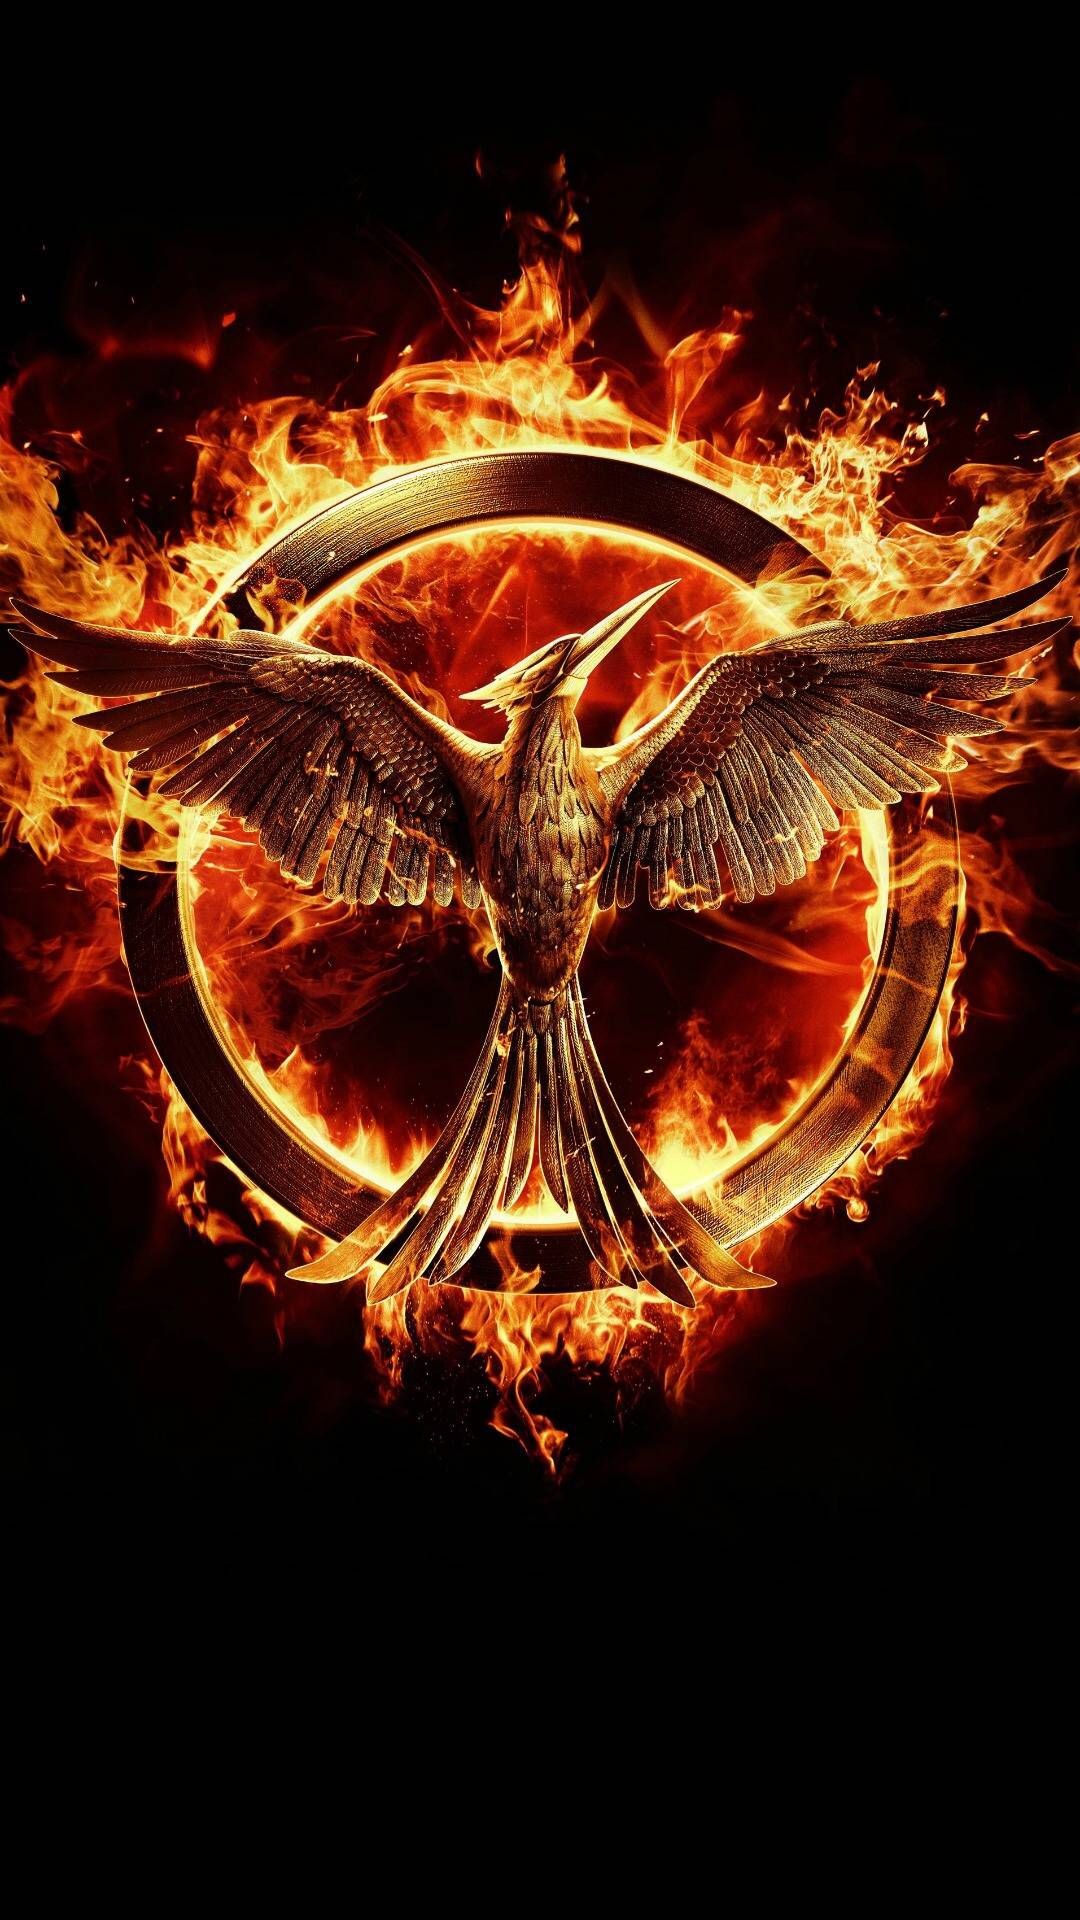 Hunger Games: The sci-fi survival film adaptation of the novel of the same name by Suzanne Collins. 1080x1920 Full HD Background.